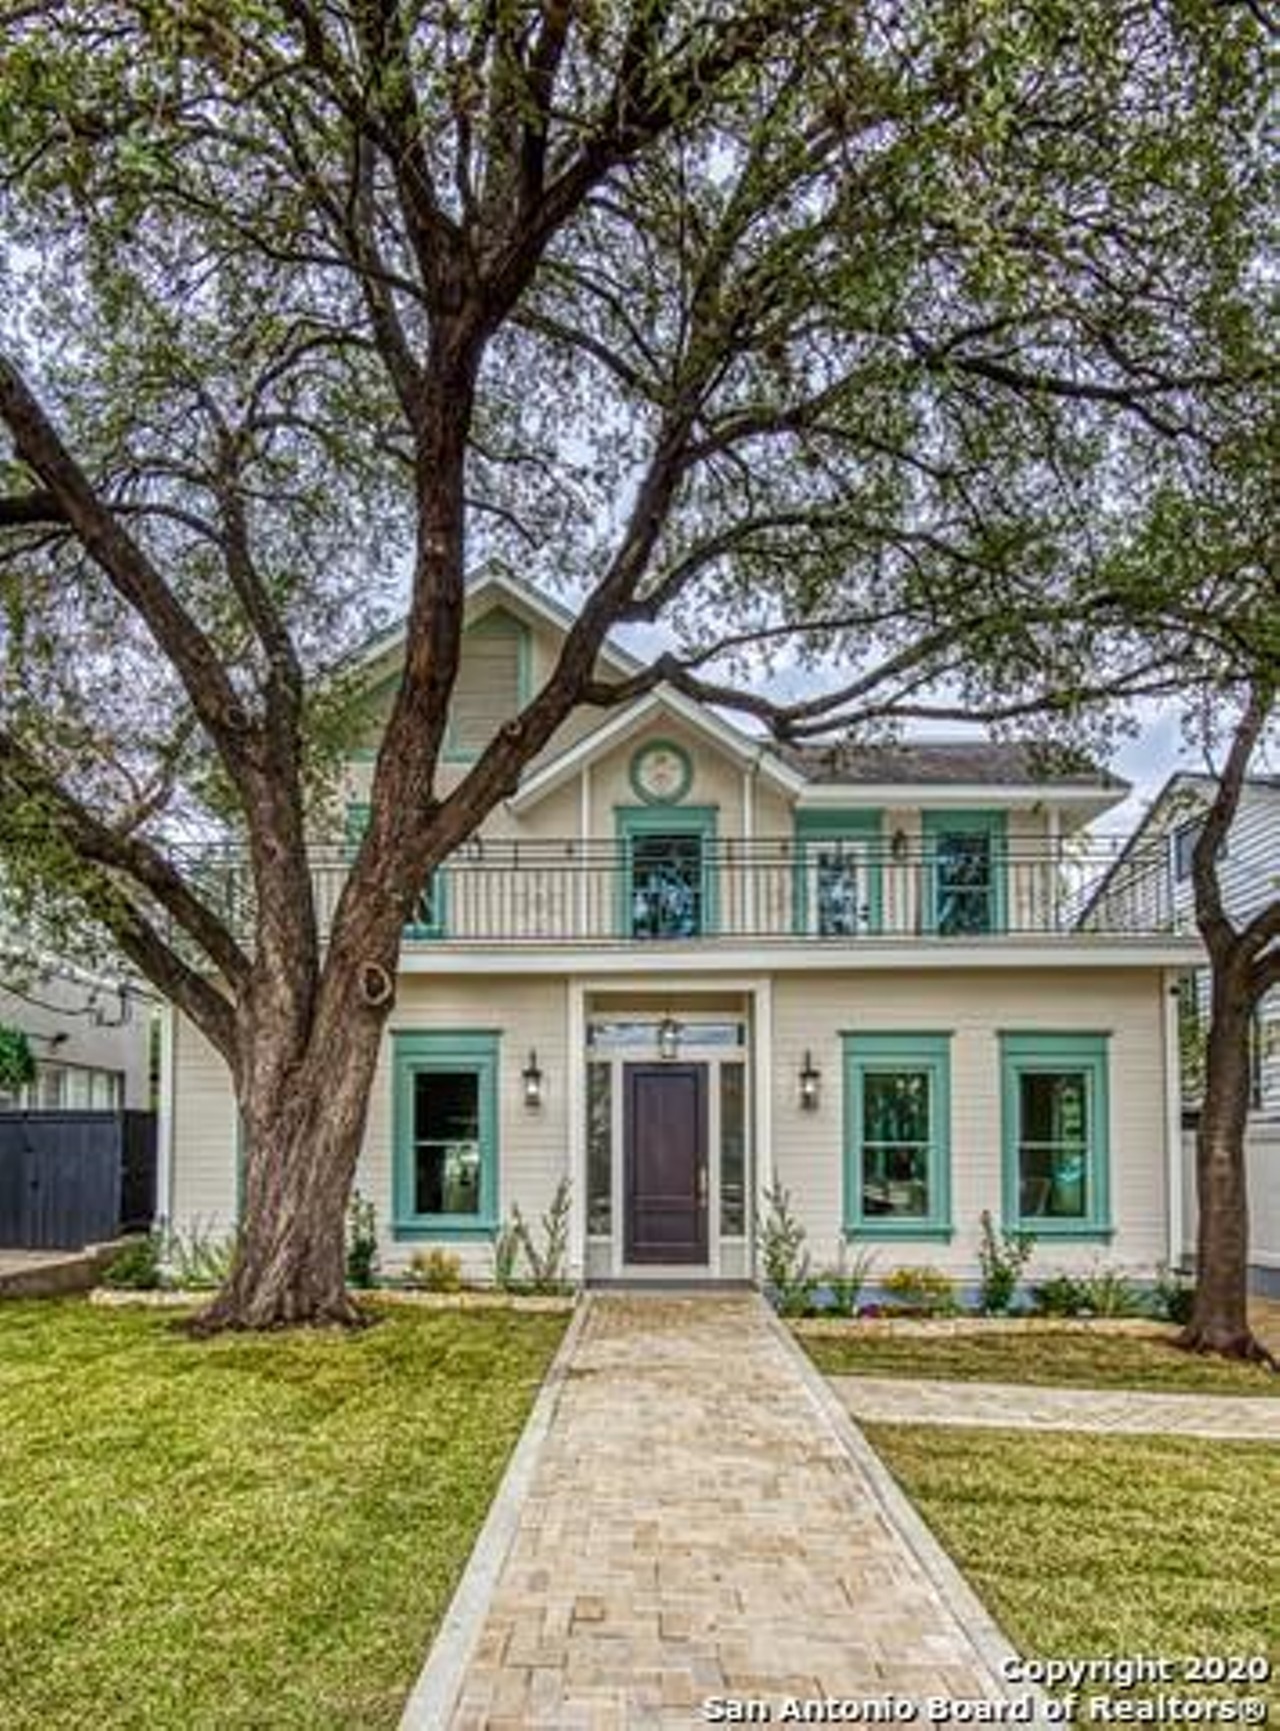 Once carved into duplex, this restored 1890 San Antonio home is now on the market